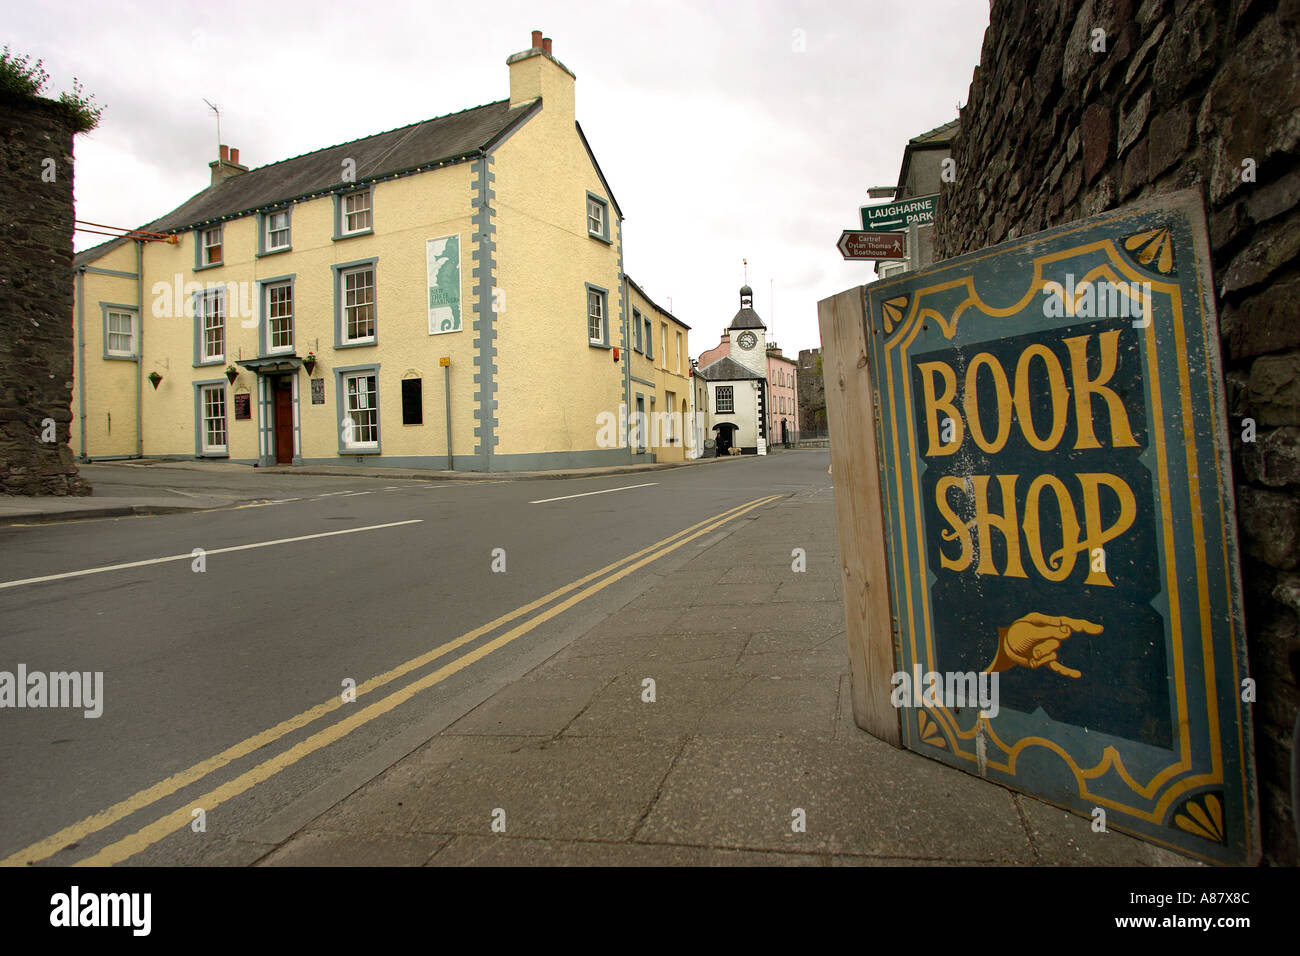 The Three Mariners pub in Laugharne owned by television actor celebrity Neil Morrissey Stock Photo